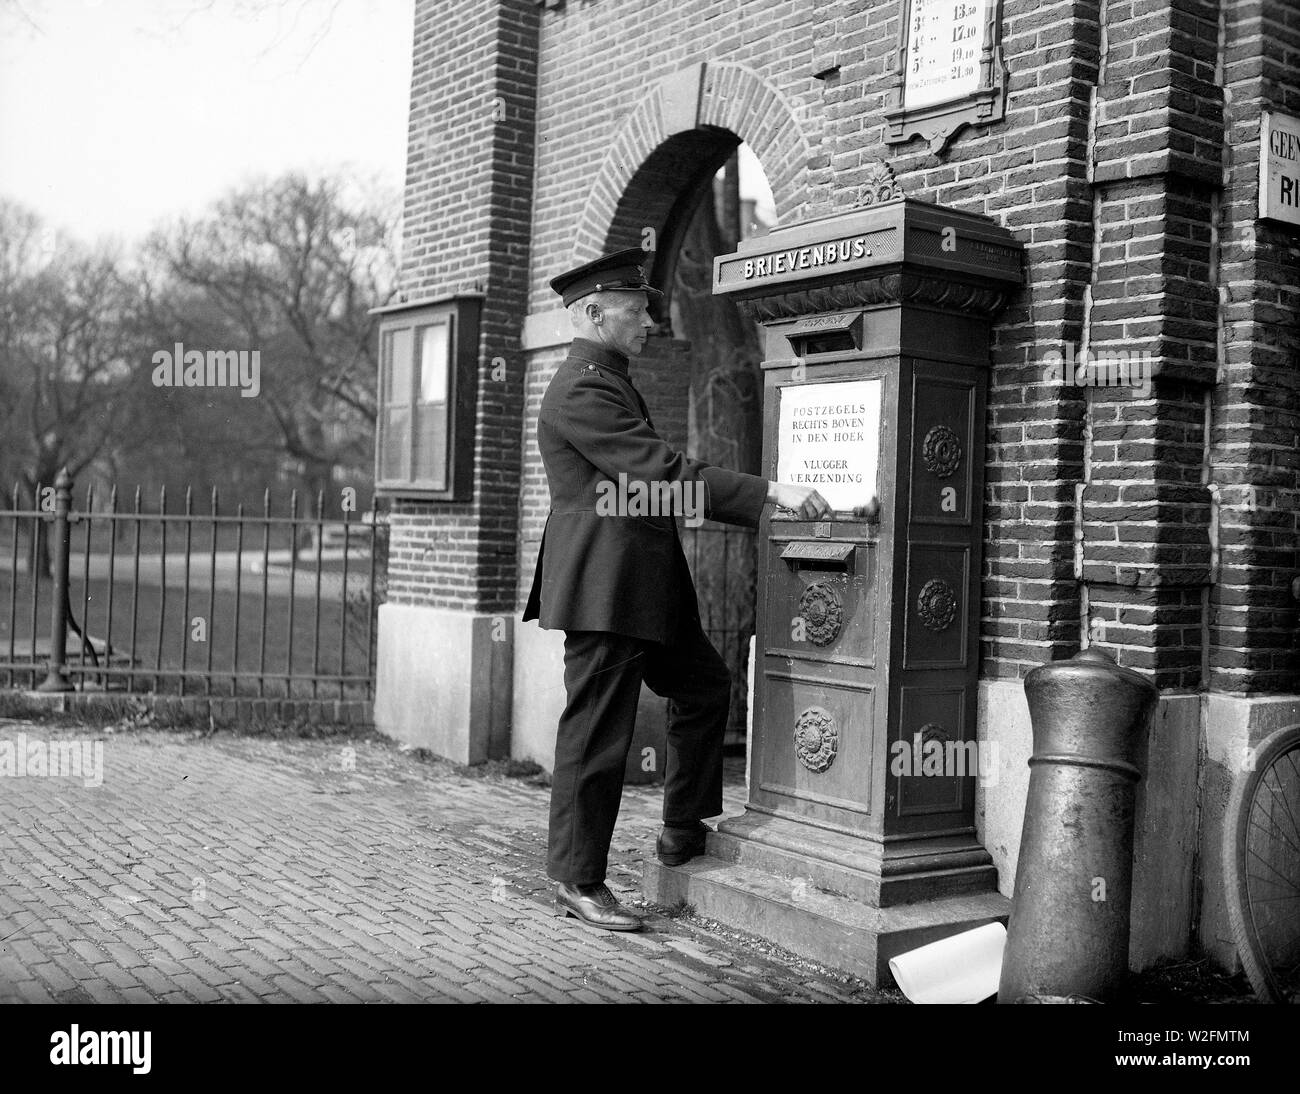 a post office worker sticks a poster on the letterbox 'Postage stamps in the upper right corner in the corner quicker shipping' Stock Photo